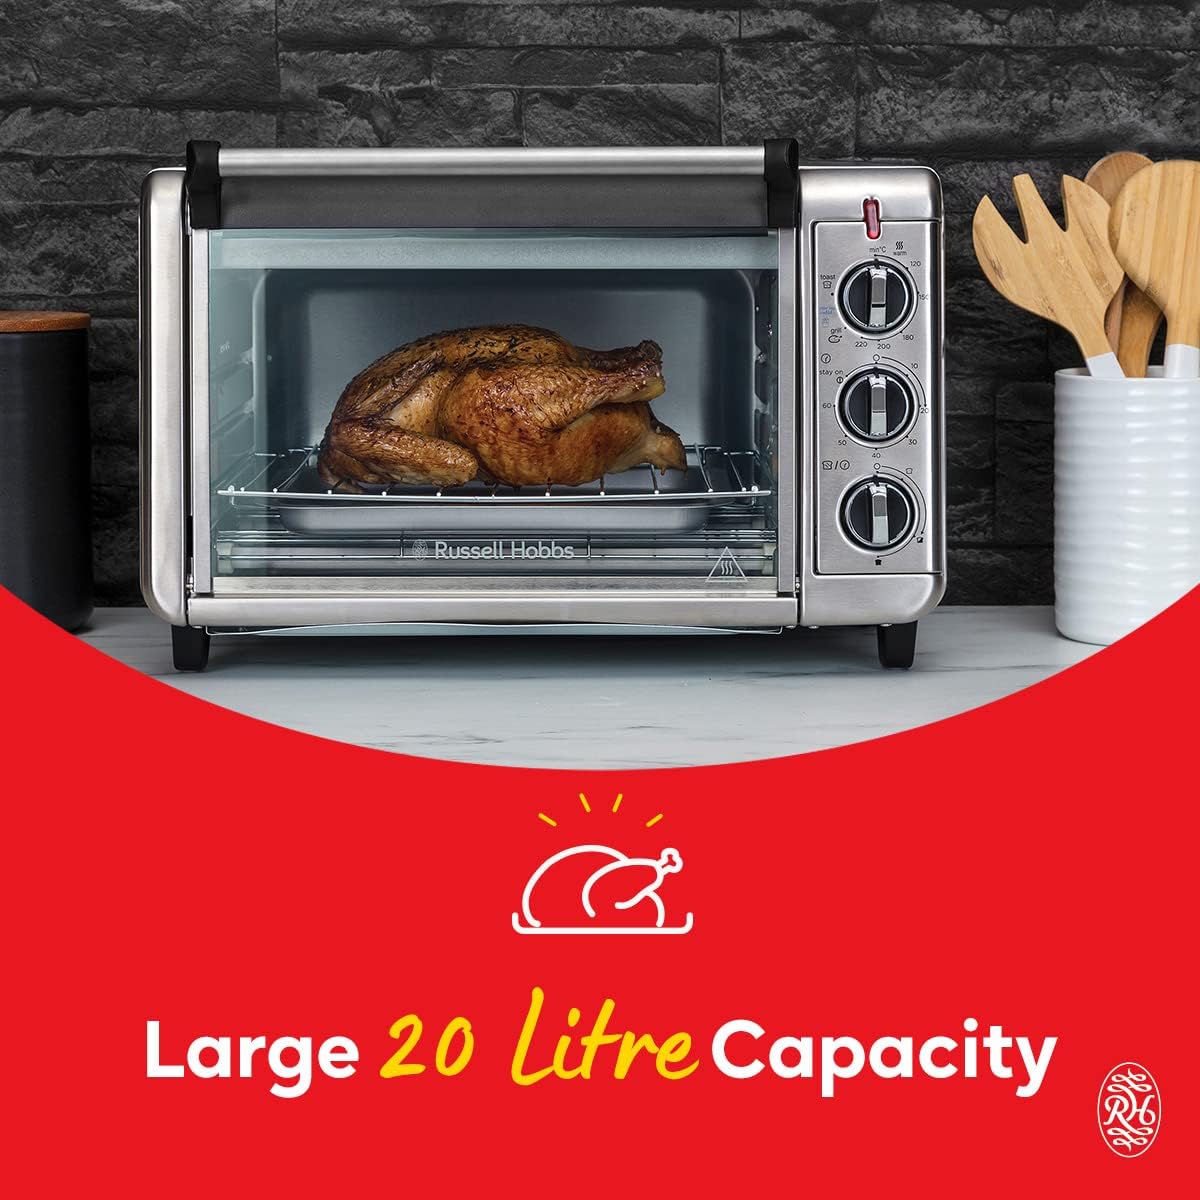 Russell Hobbs 20L Oven 5 - in - 1 Rapid Hot Air Fryer, Mini Oven, Grill, Toaster, Warming Function, Timer, Energy Saving, Pizza Diameter 30cm, Incs. Frying Basket, Baking Tray & Grill Rack, 26680 - Amazing Gadgets Outlet